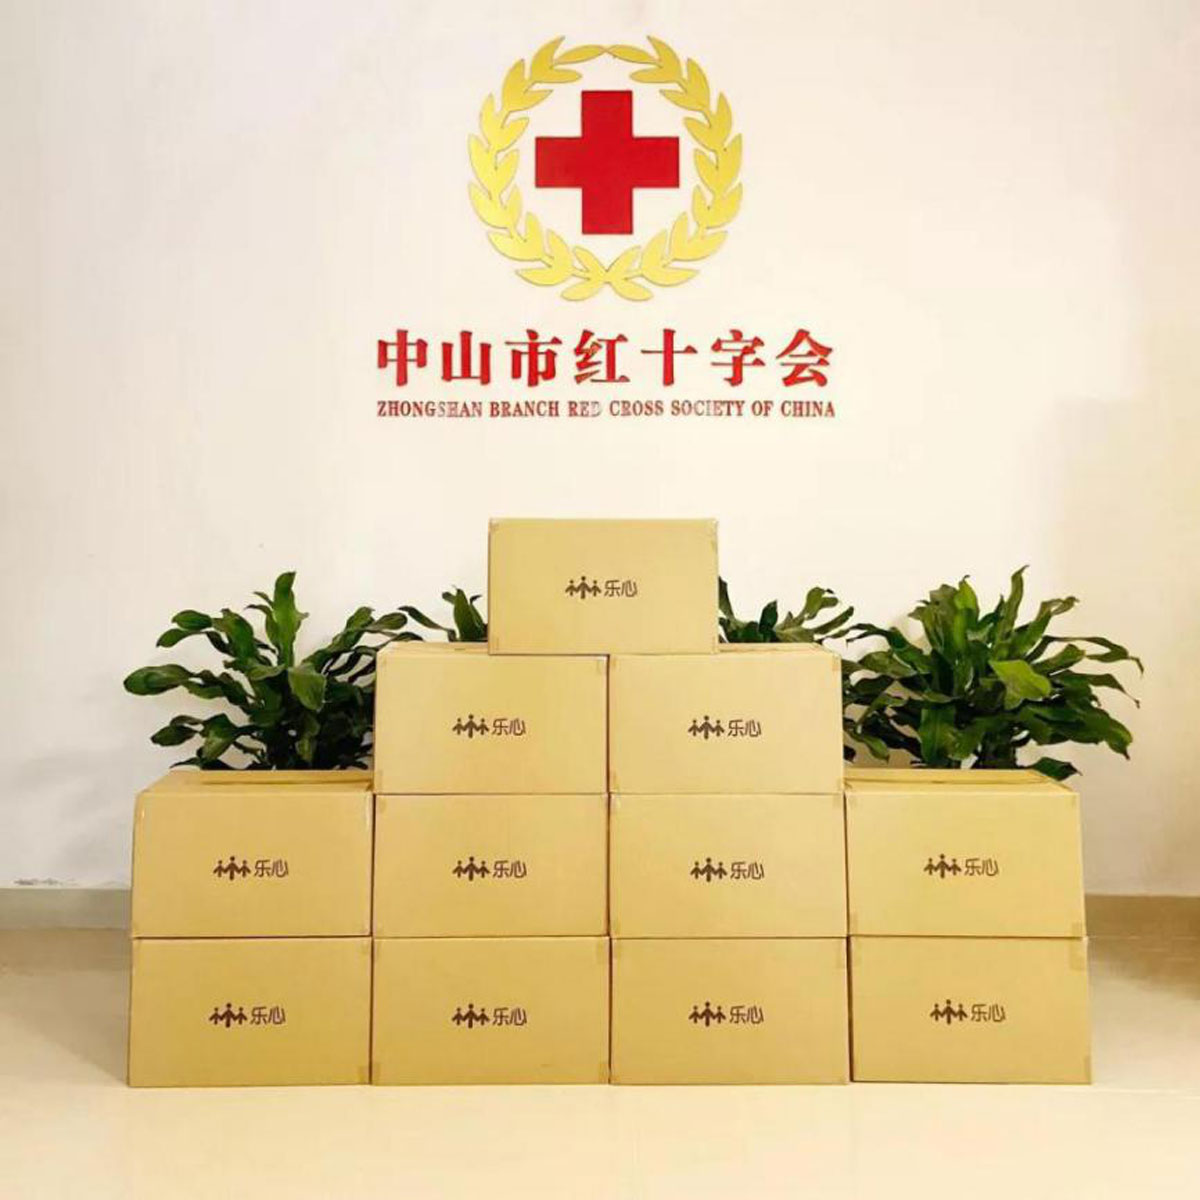 Fighting With Coronavirus | Transtek Has Donated 1500 Sets of Medical-grade Digital Blood Pressure Monitors and the Matching RPM System To Wuhan